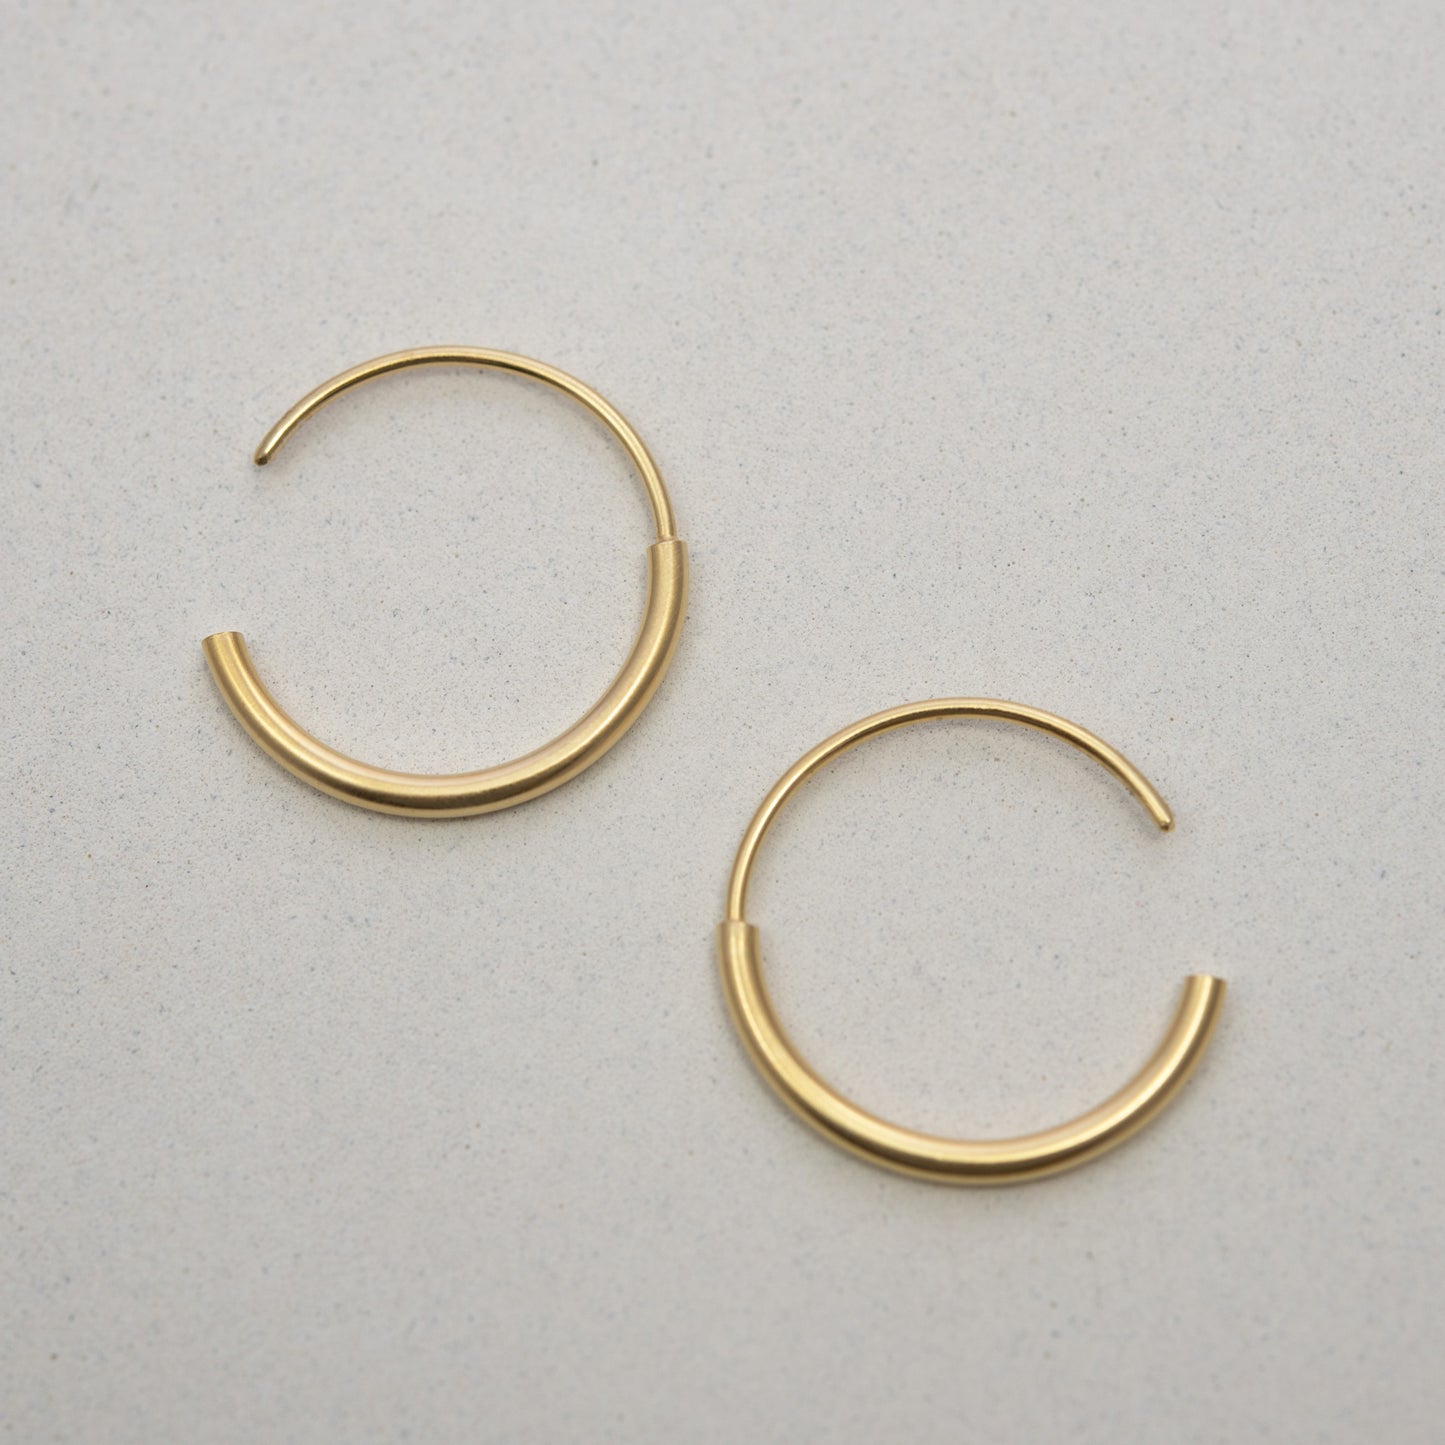 Handcrafted gold hoops by AgJc